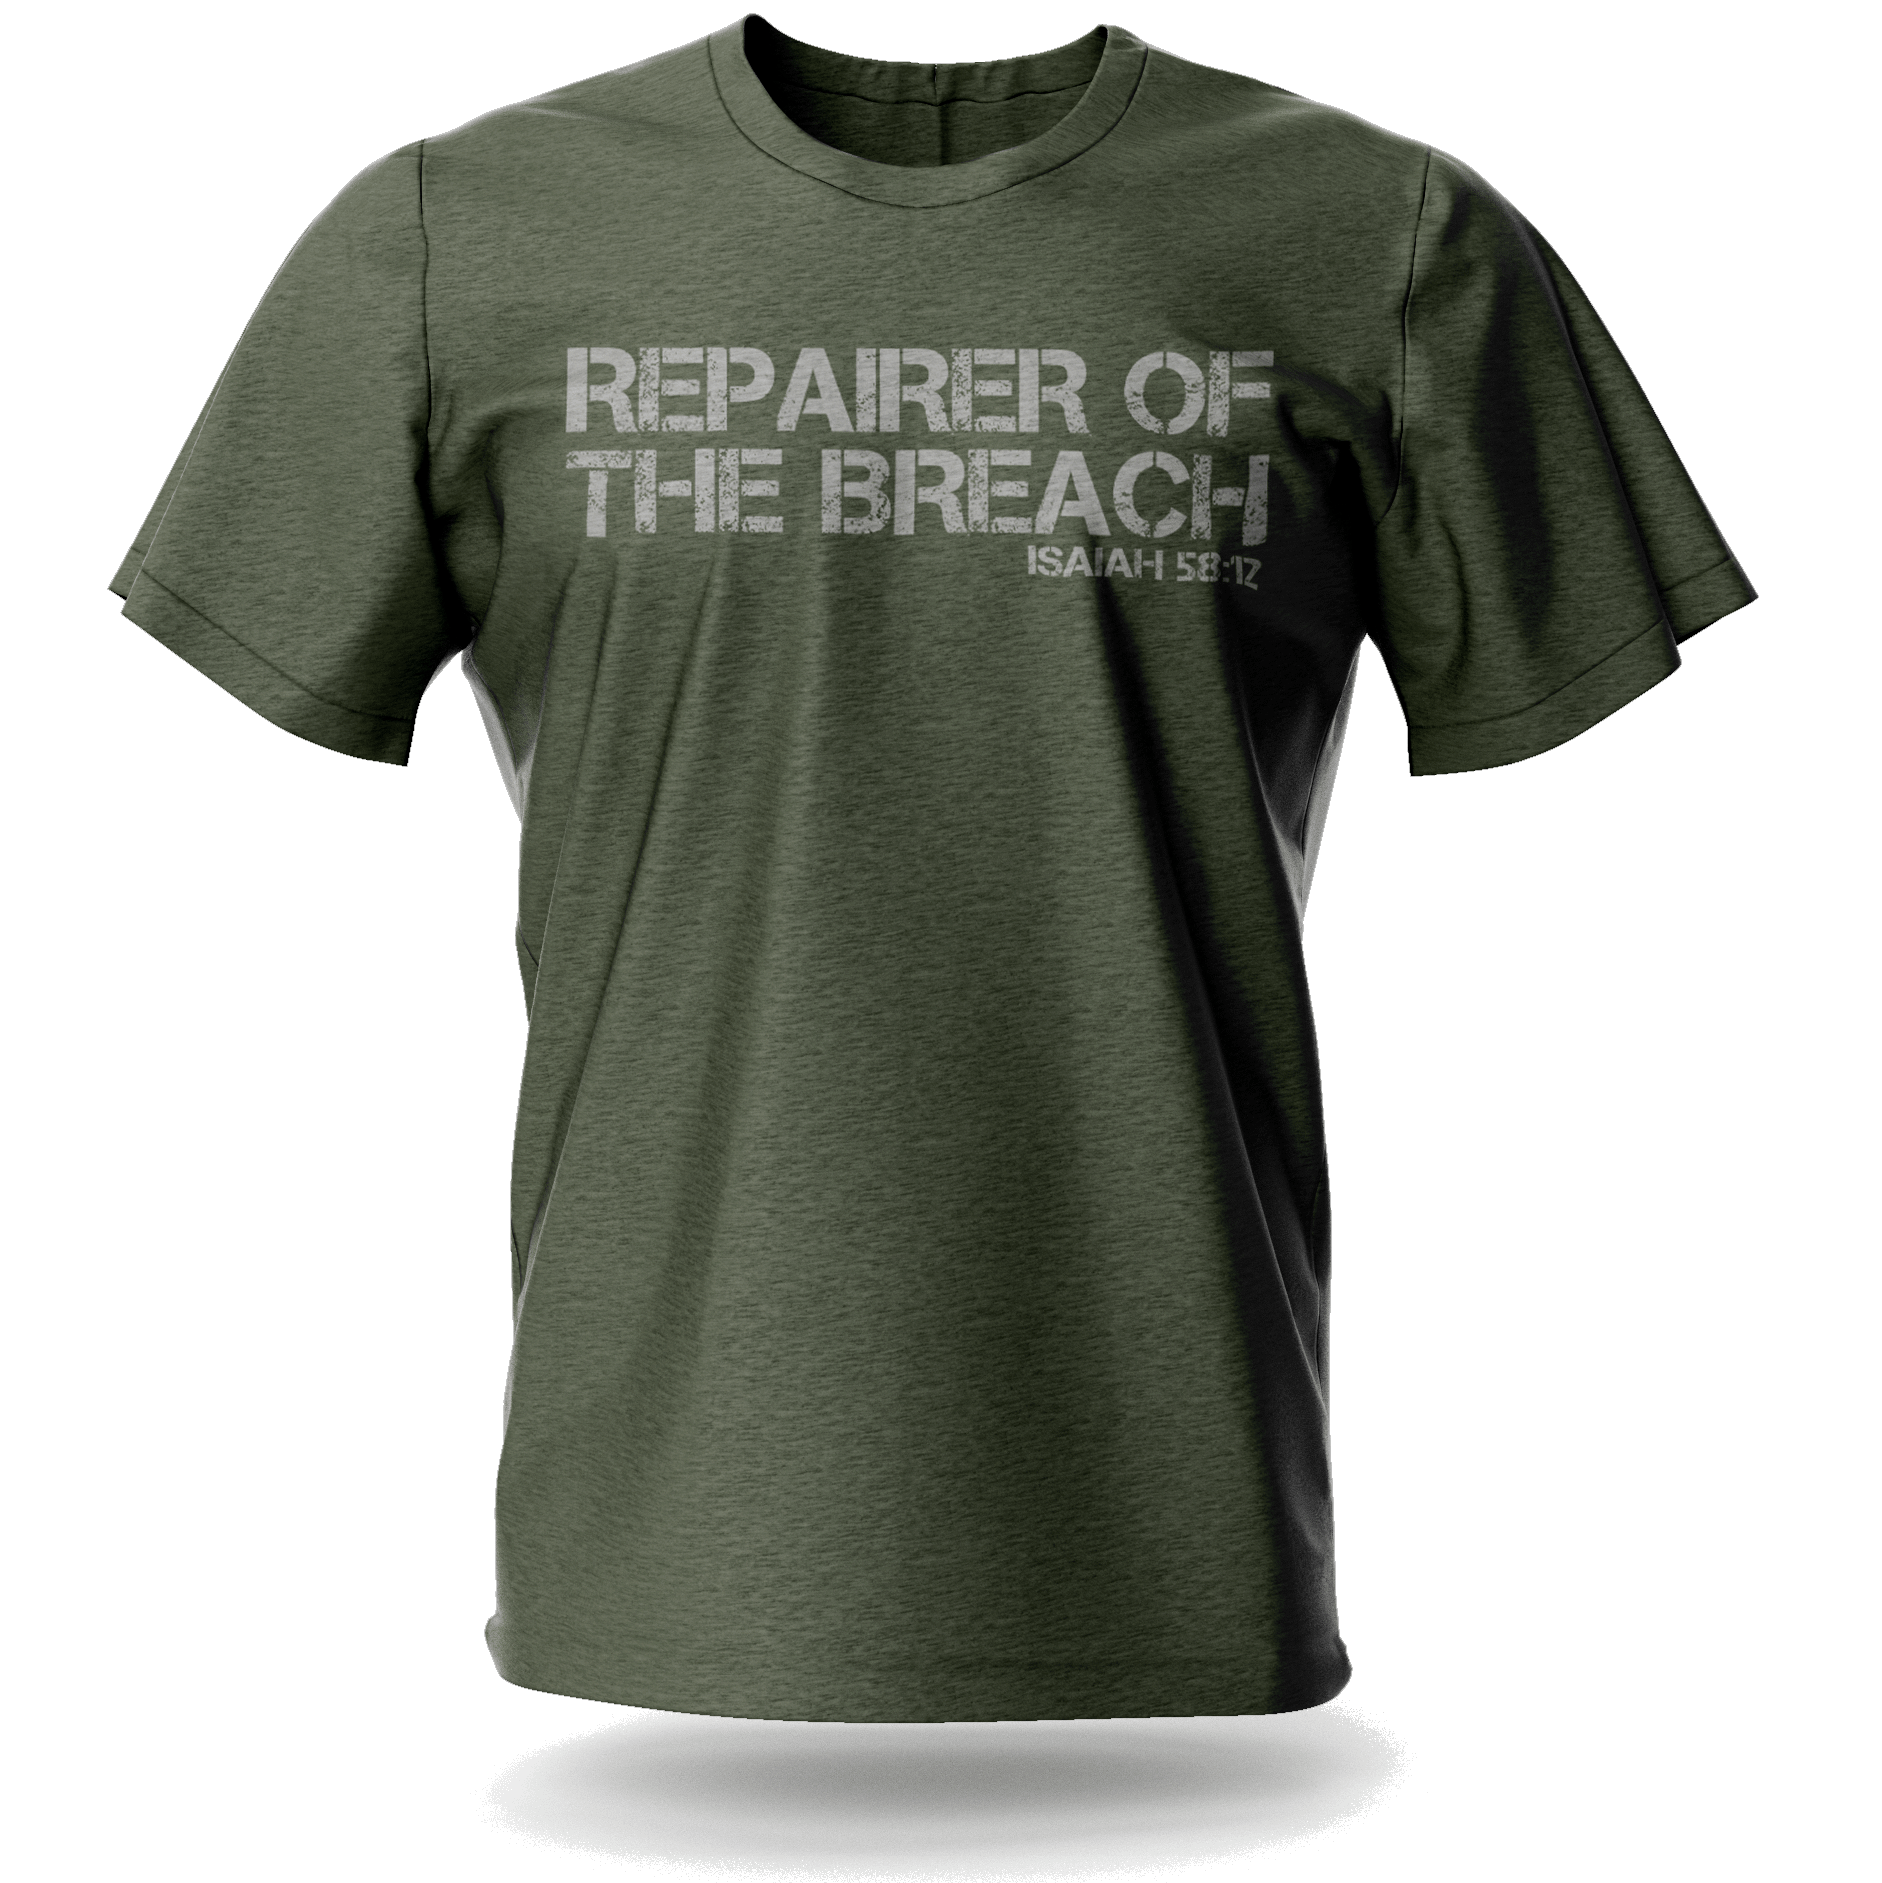 Repairer of the Breach Tee